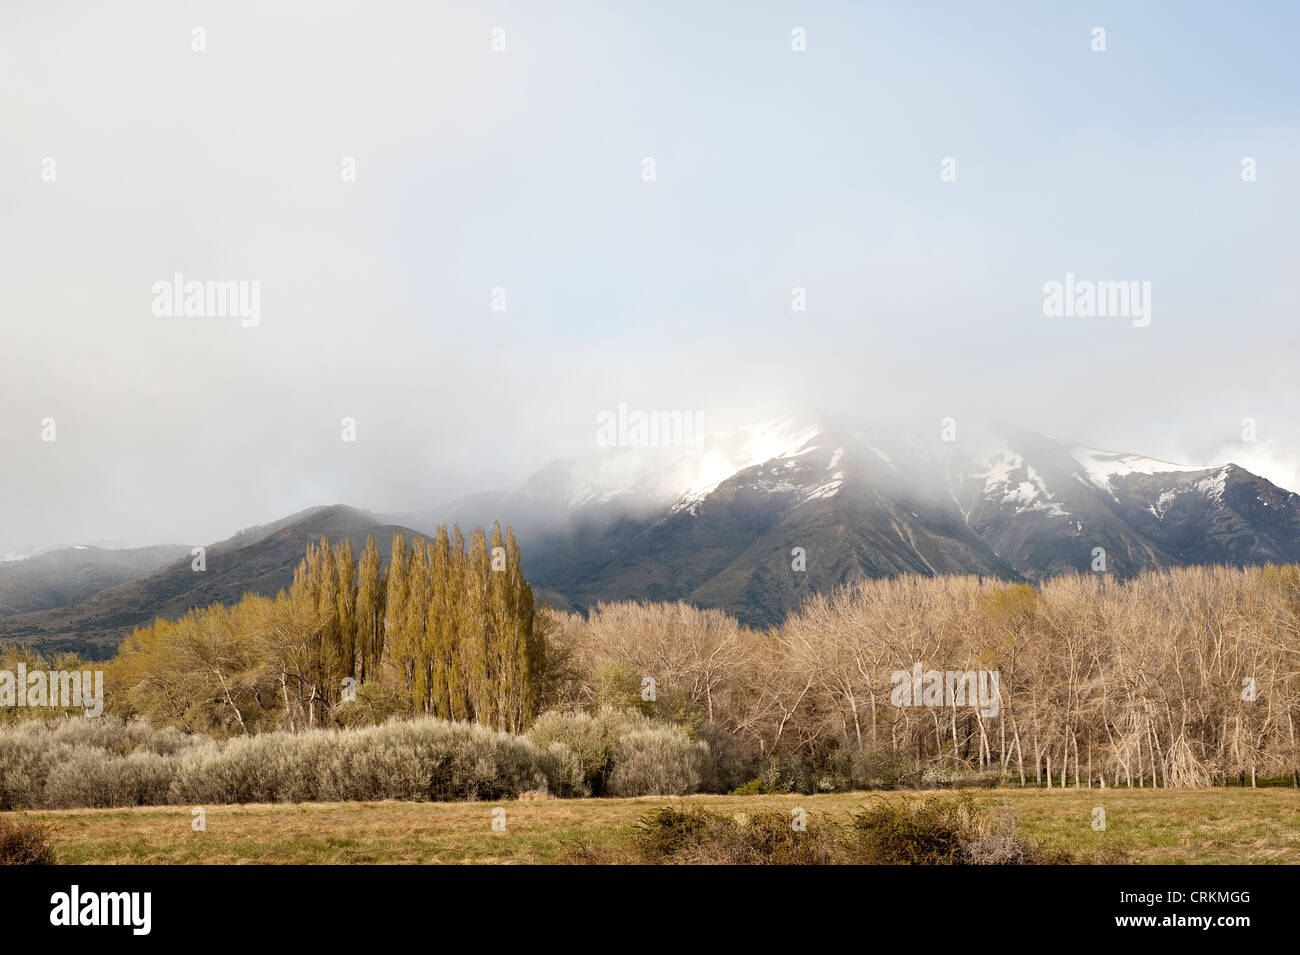 Landscape with low clouds Lanin National Park Neuquen Argentina South America October Stock Photo